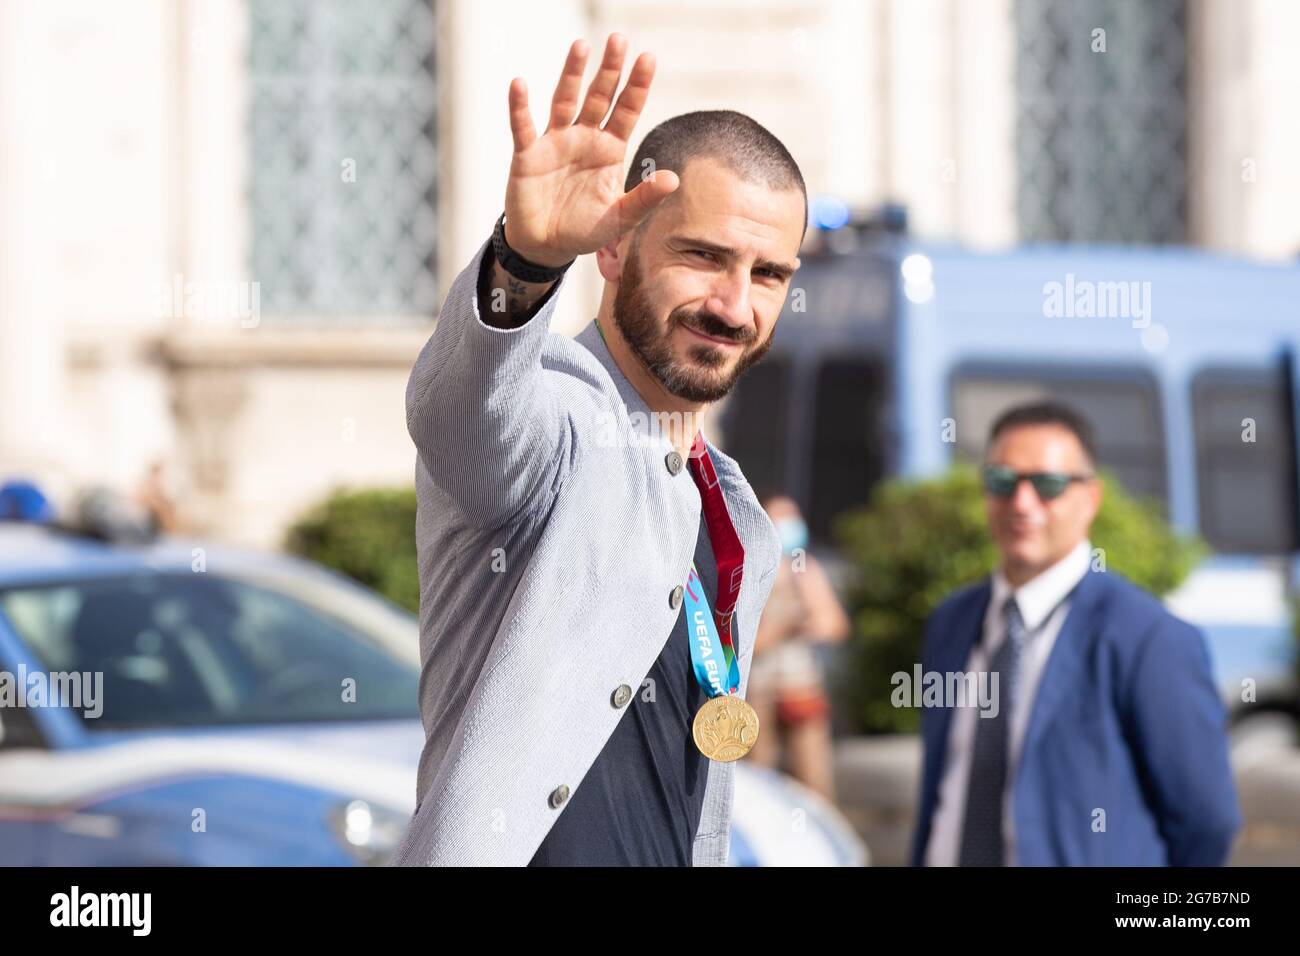 Rome, Italy. 12th July, 2021. Leonardo Bonuccithe player of the Italian National Football Team enter the Quirinal Palace in Rome to visit the President of the Republic Sergio Mattarella after the victory of the European Football Championships, raising the cup won to the sky. The Italian tennis player Matteo Berrettini, finalist at the Wimbledon tournament, also attended the ceremony (Photo by Matteo Nardone/Pacific Press/Sipa USA) Credit: Sipa USA/Alamy Live News Stock Photo